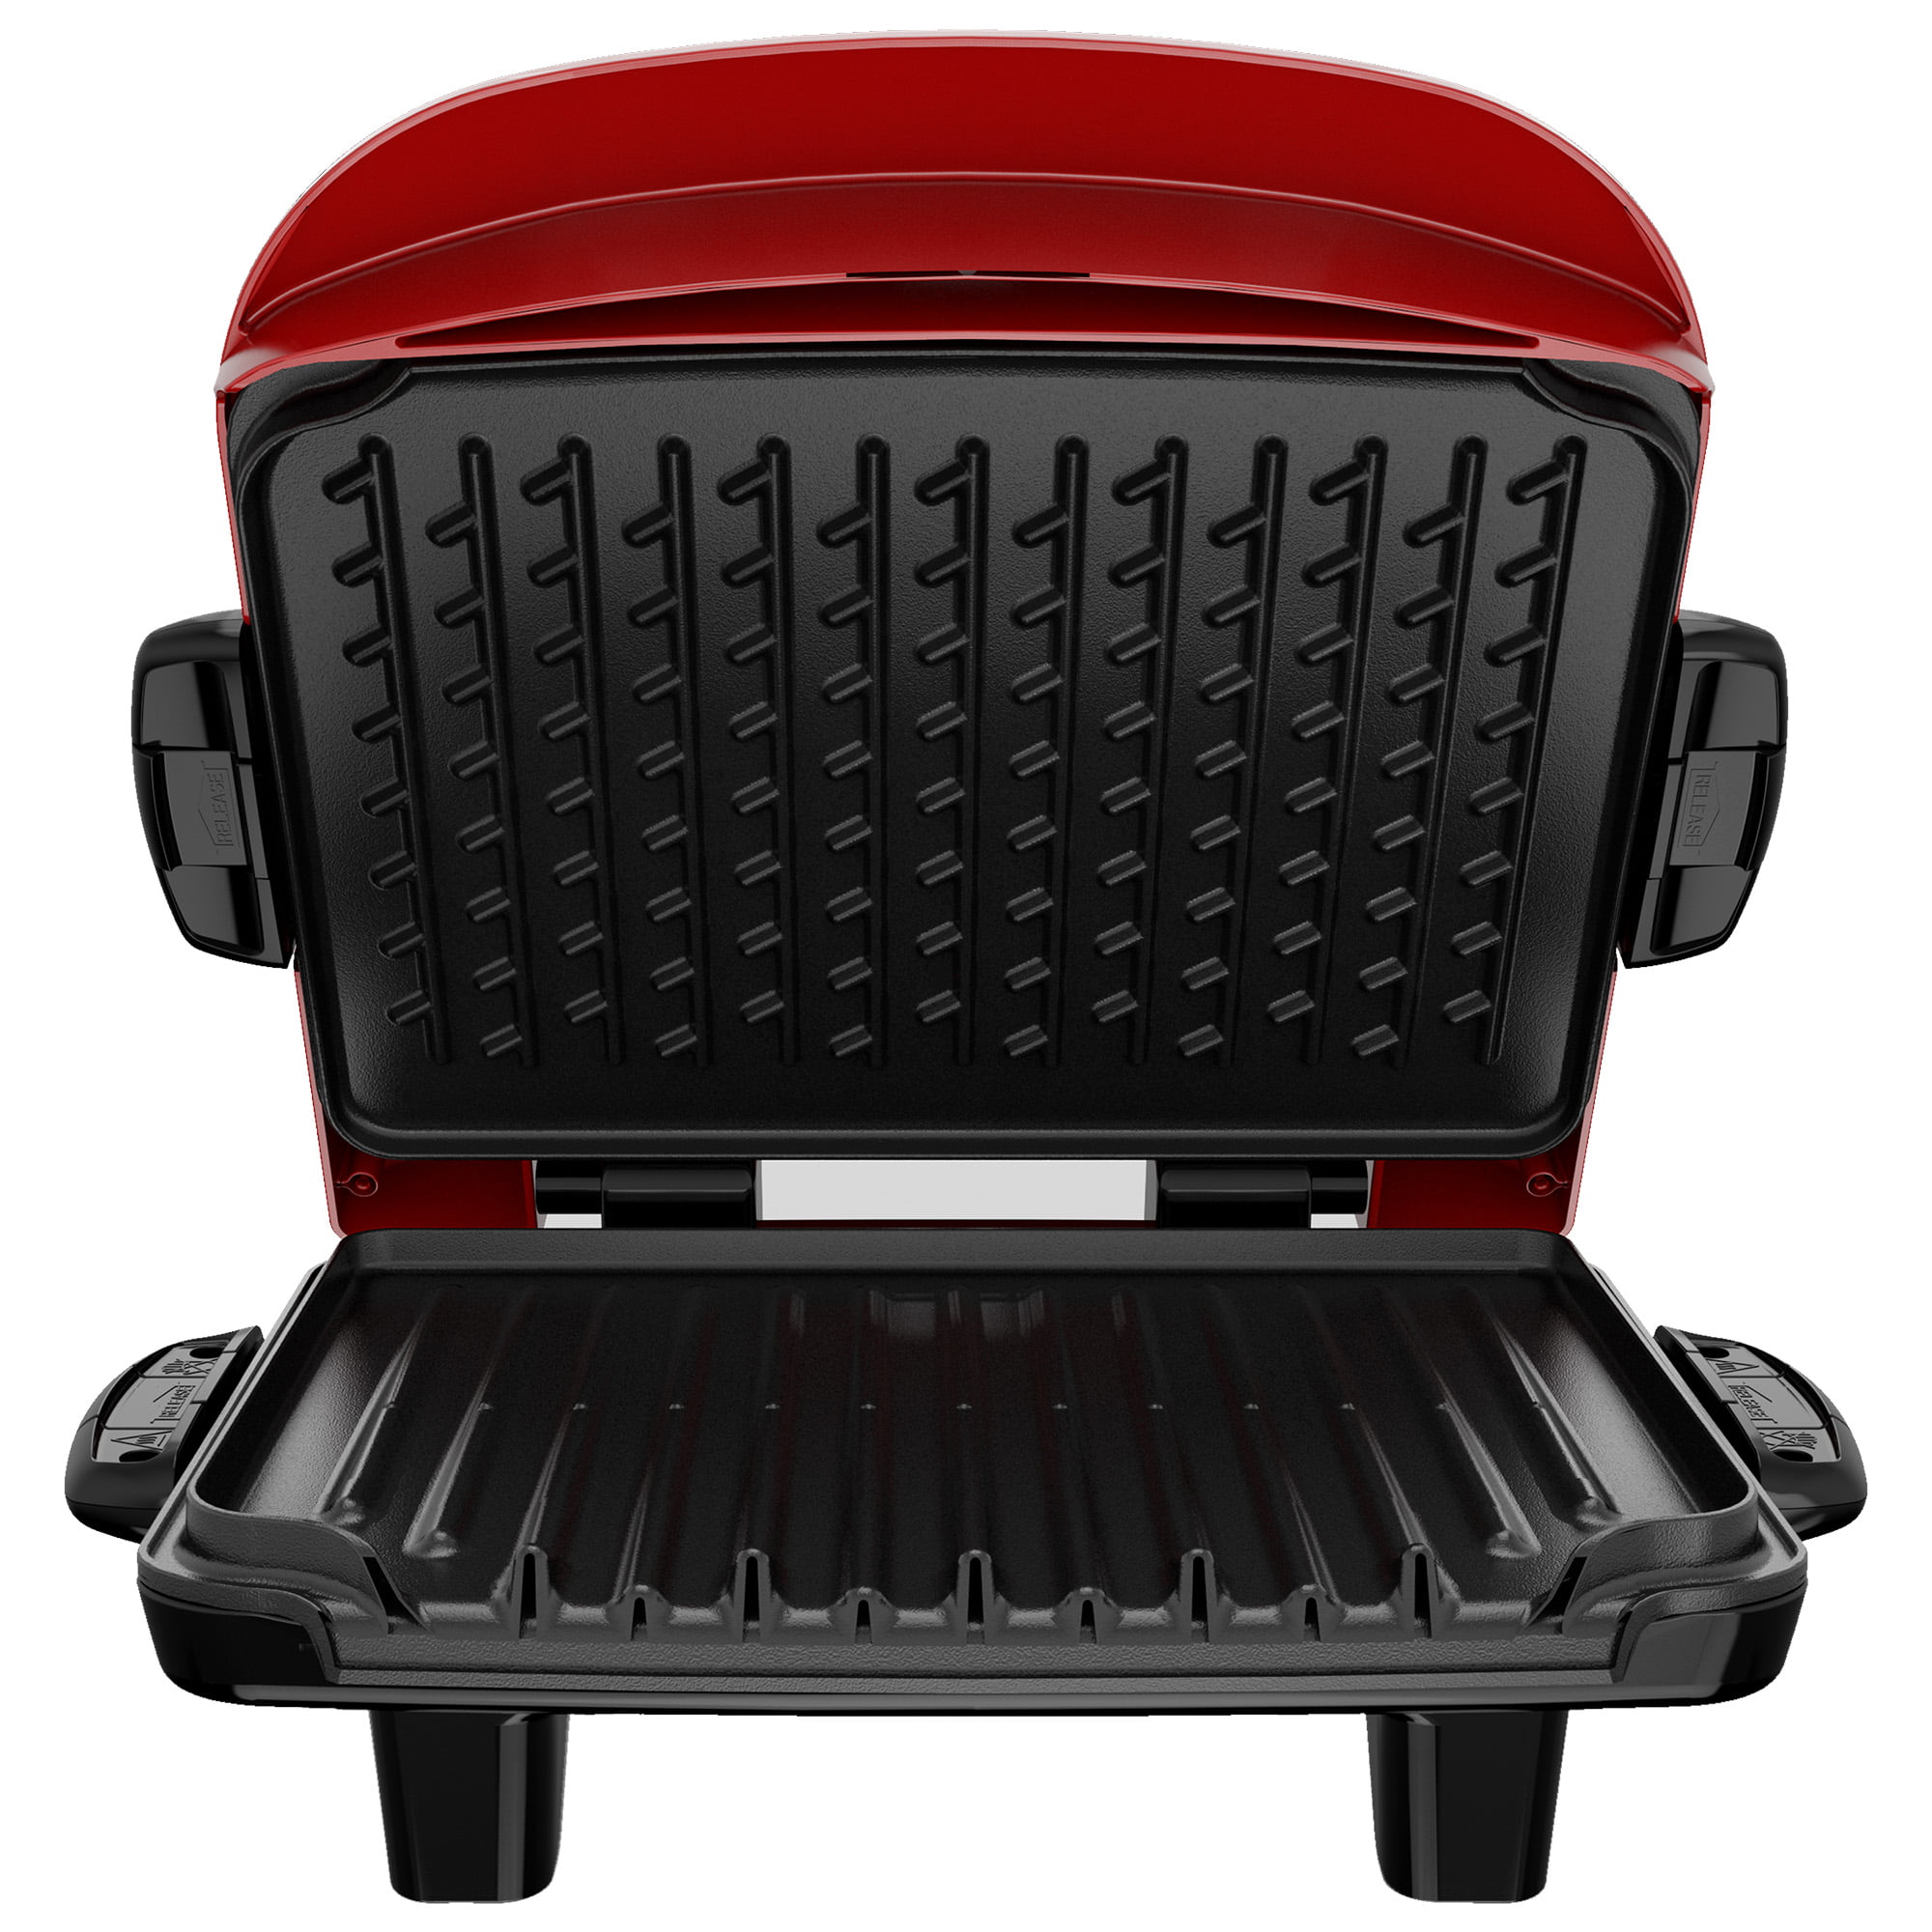 George Foreman 5-Serving Removable Plate Grill and Panini Press GRP472 -  appliances - by owner - sale - craigslist